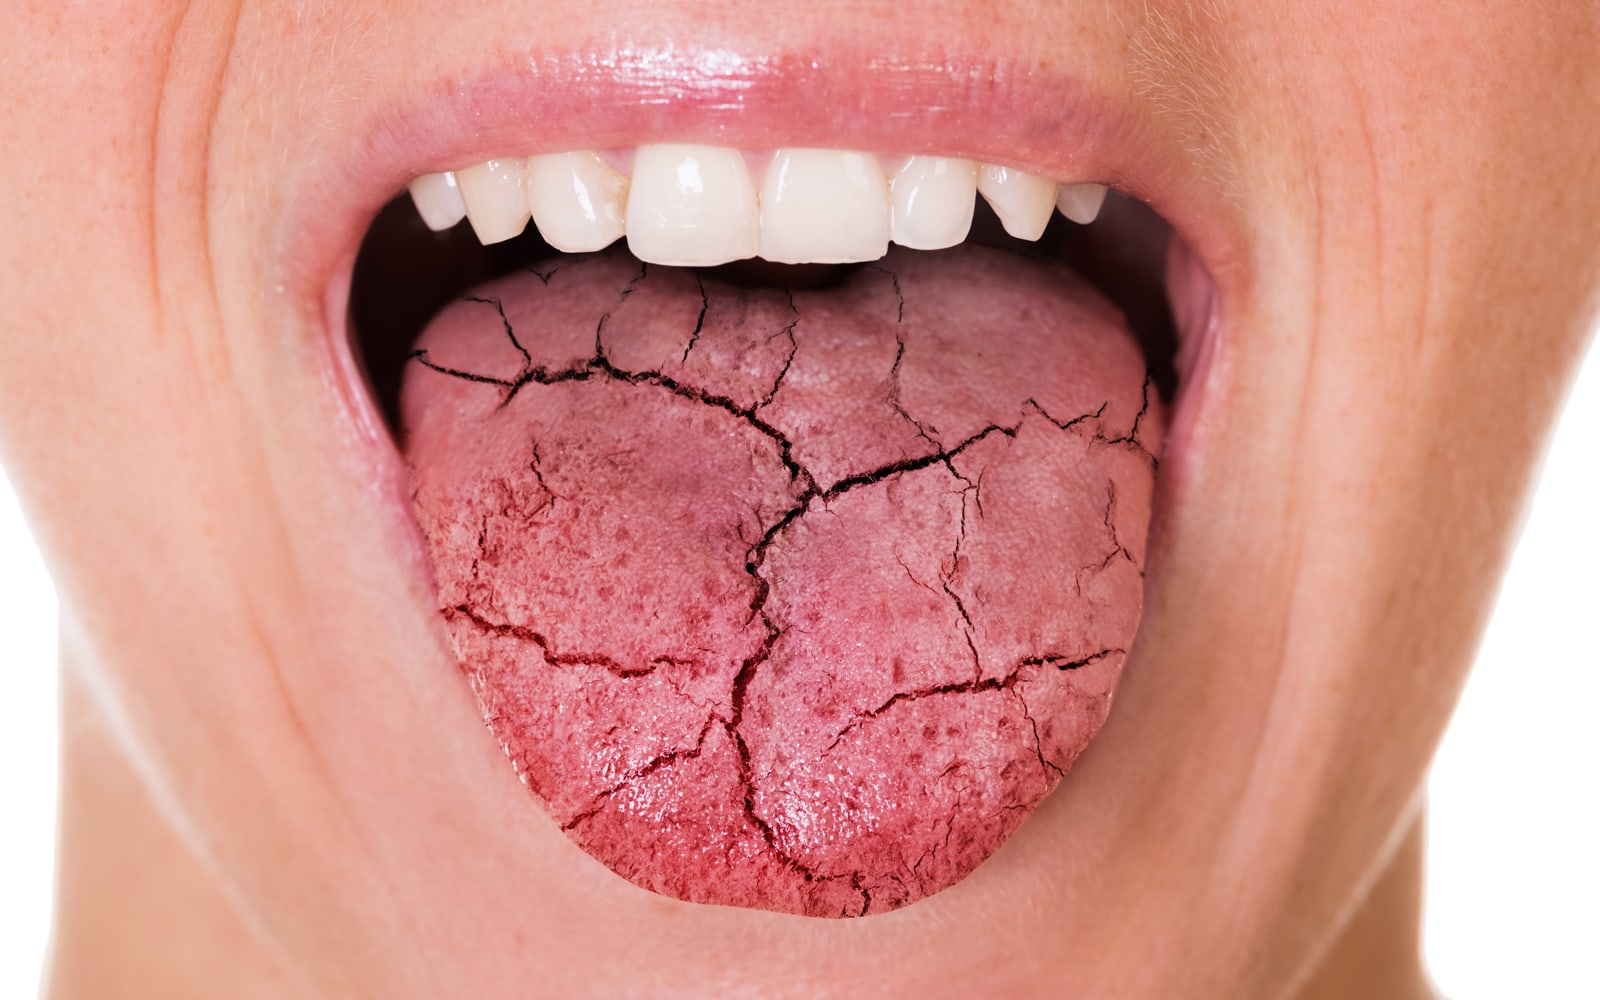 Easy Coping Tips for Common Mouth Problems